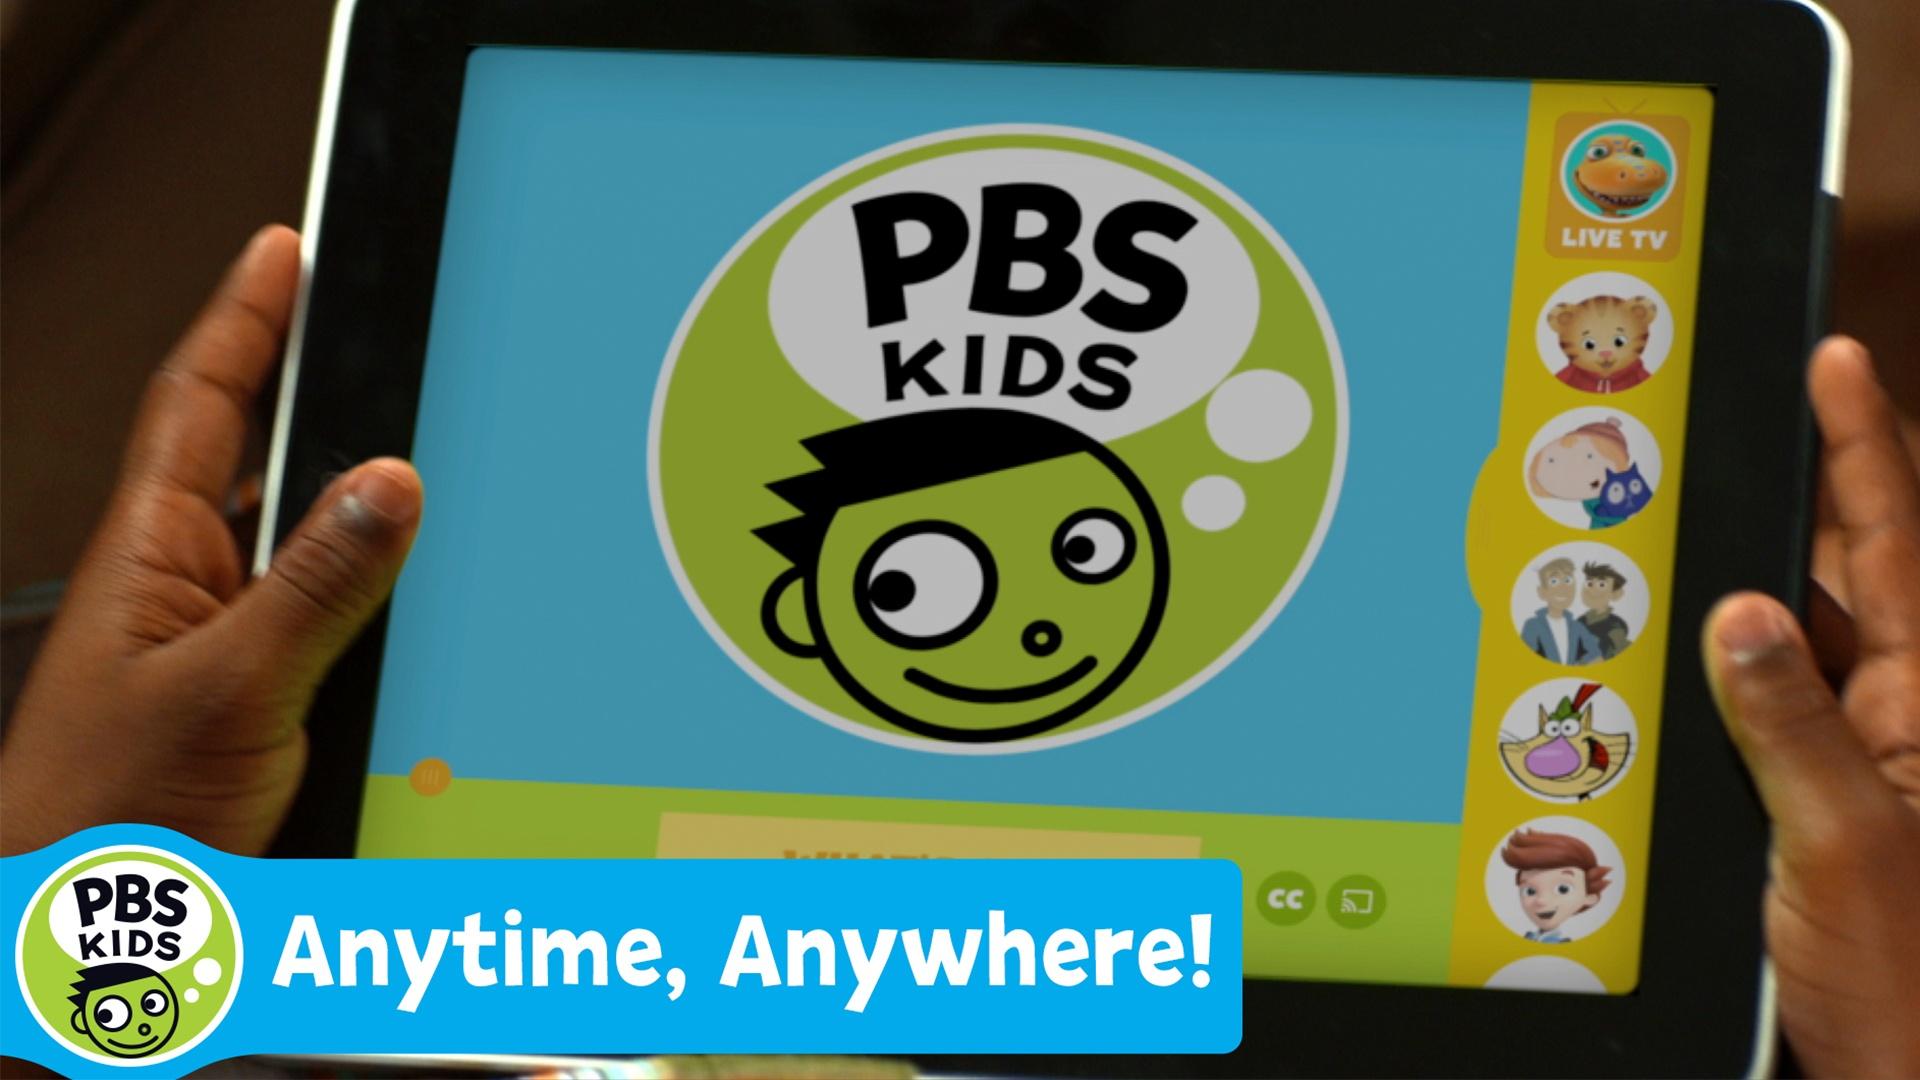 Download the free PBS KIDS app to watch video anytime, anywhere.